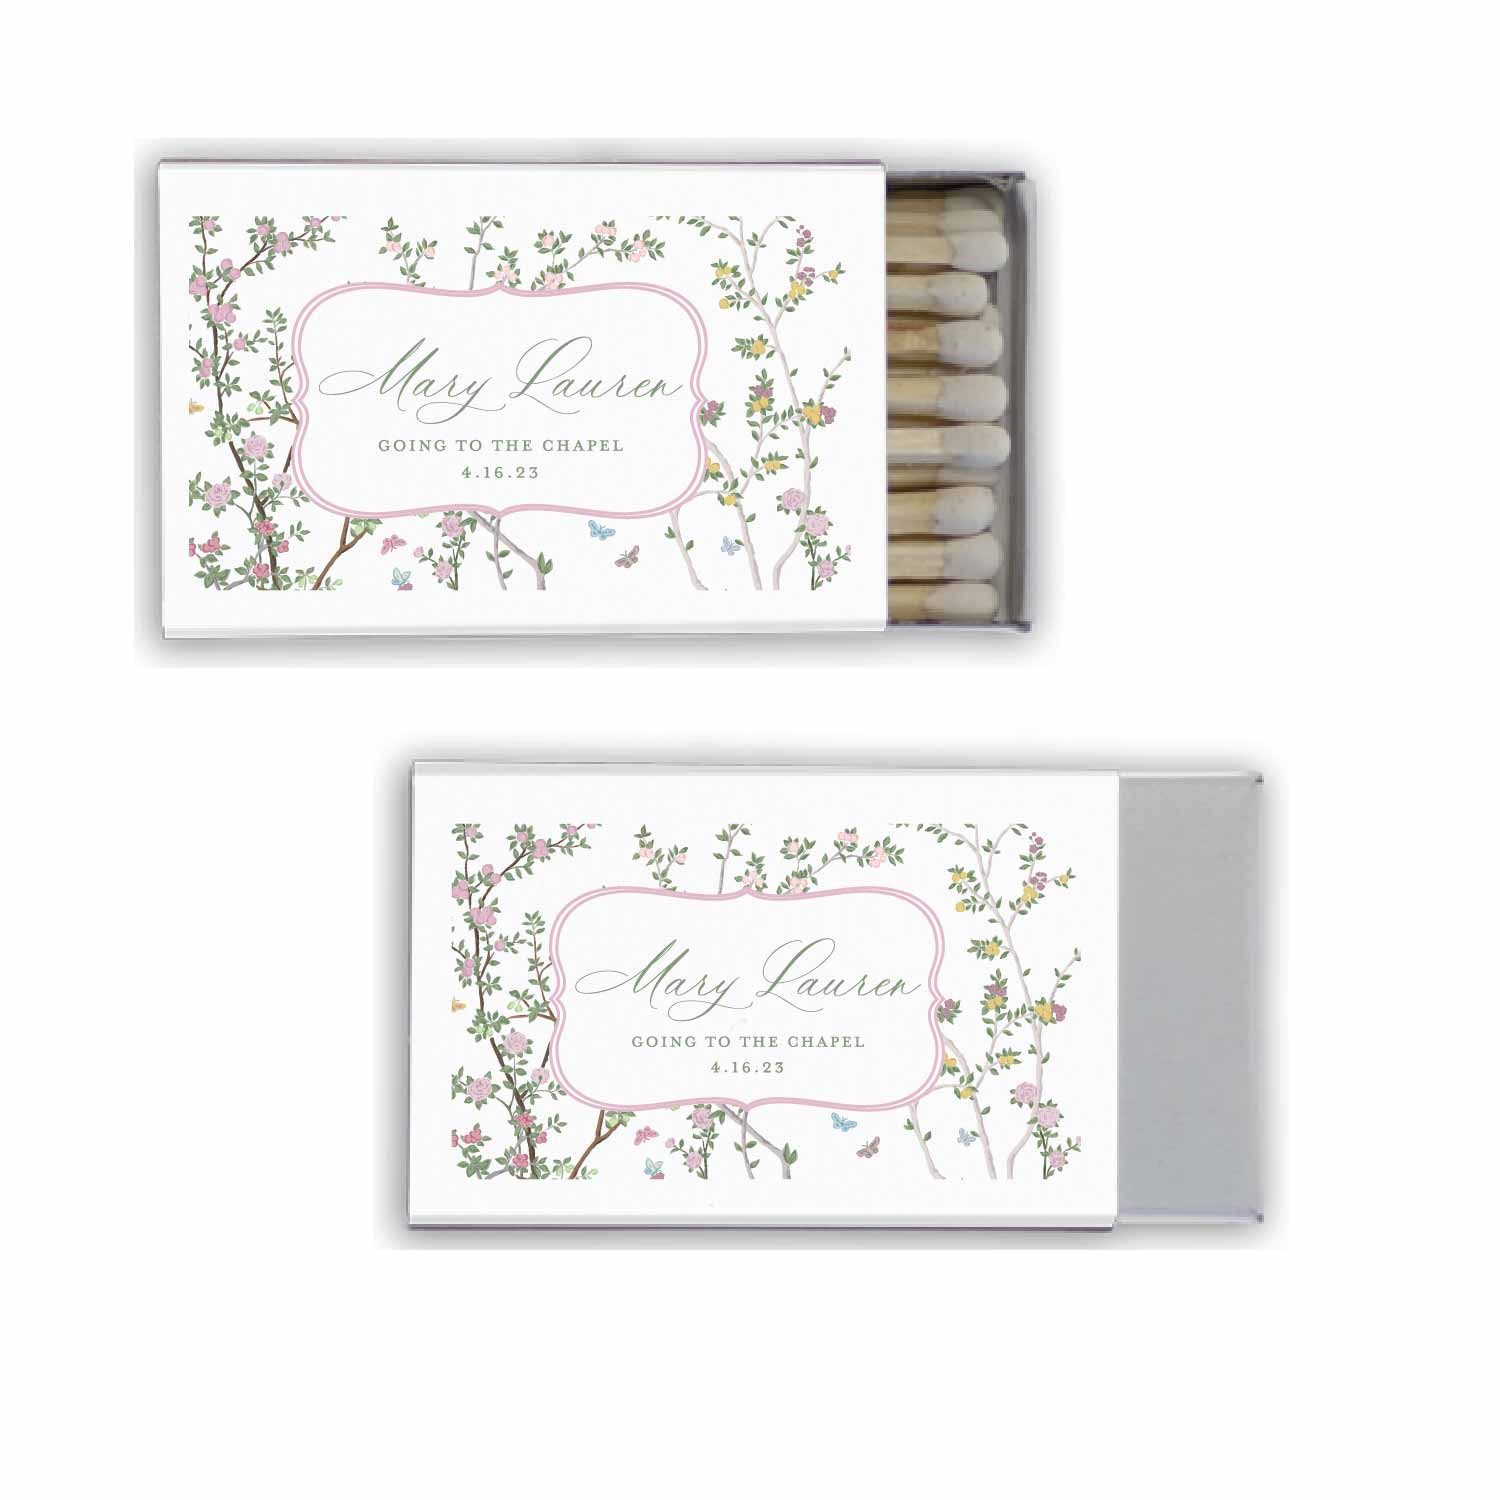 chinoiserie Personalized Match Boxes